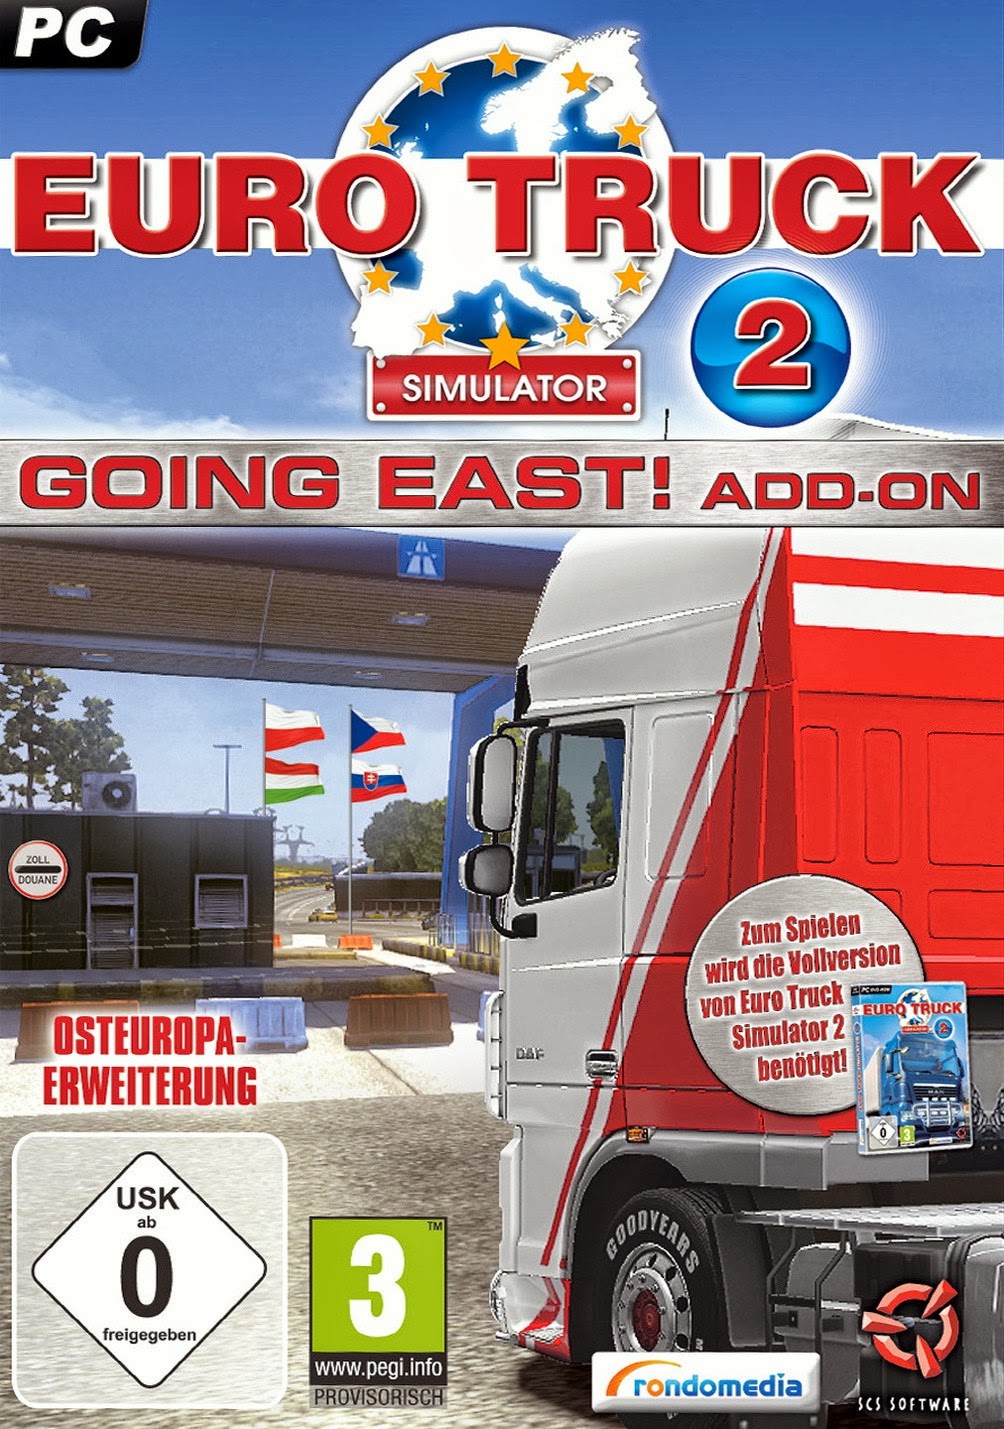 euro-truck-simulator-2-going-east-game-for-pc-download-free-free-pc-download-games